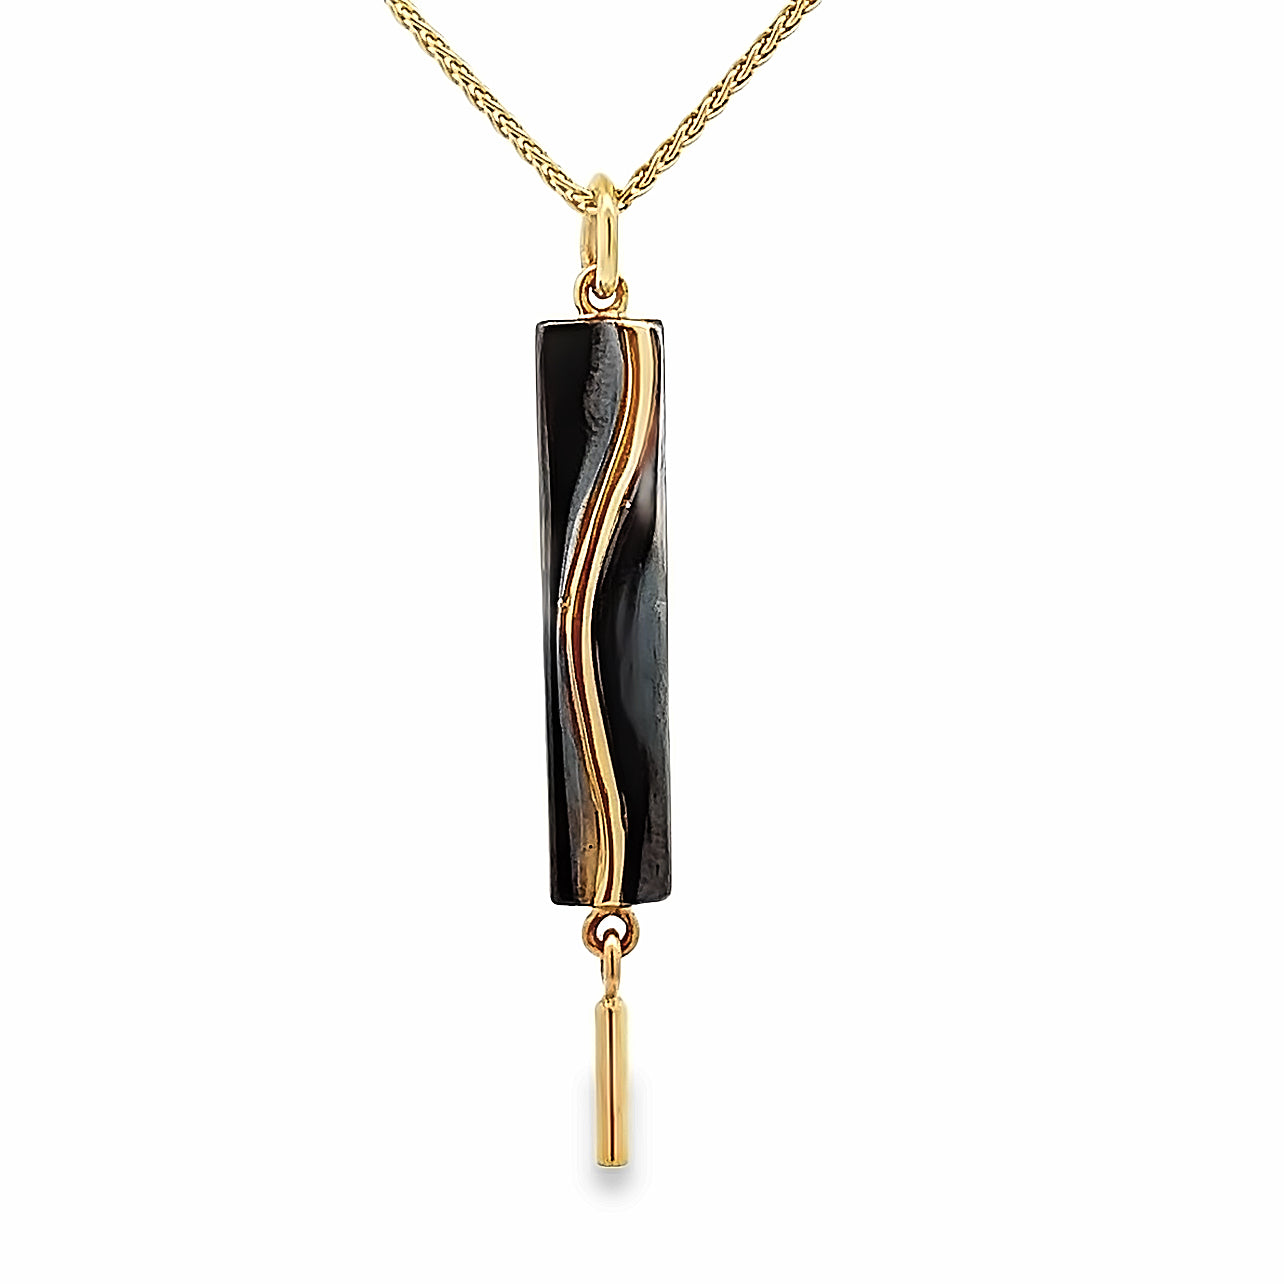 Oxidized Sterling Silver and 18k Yellow Gold Pathways Pendant by Paul Richter